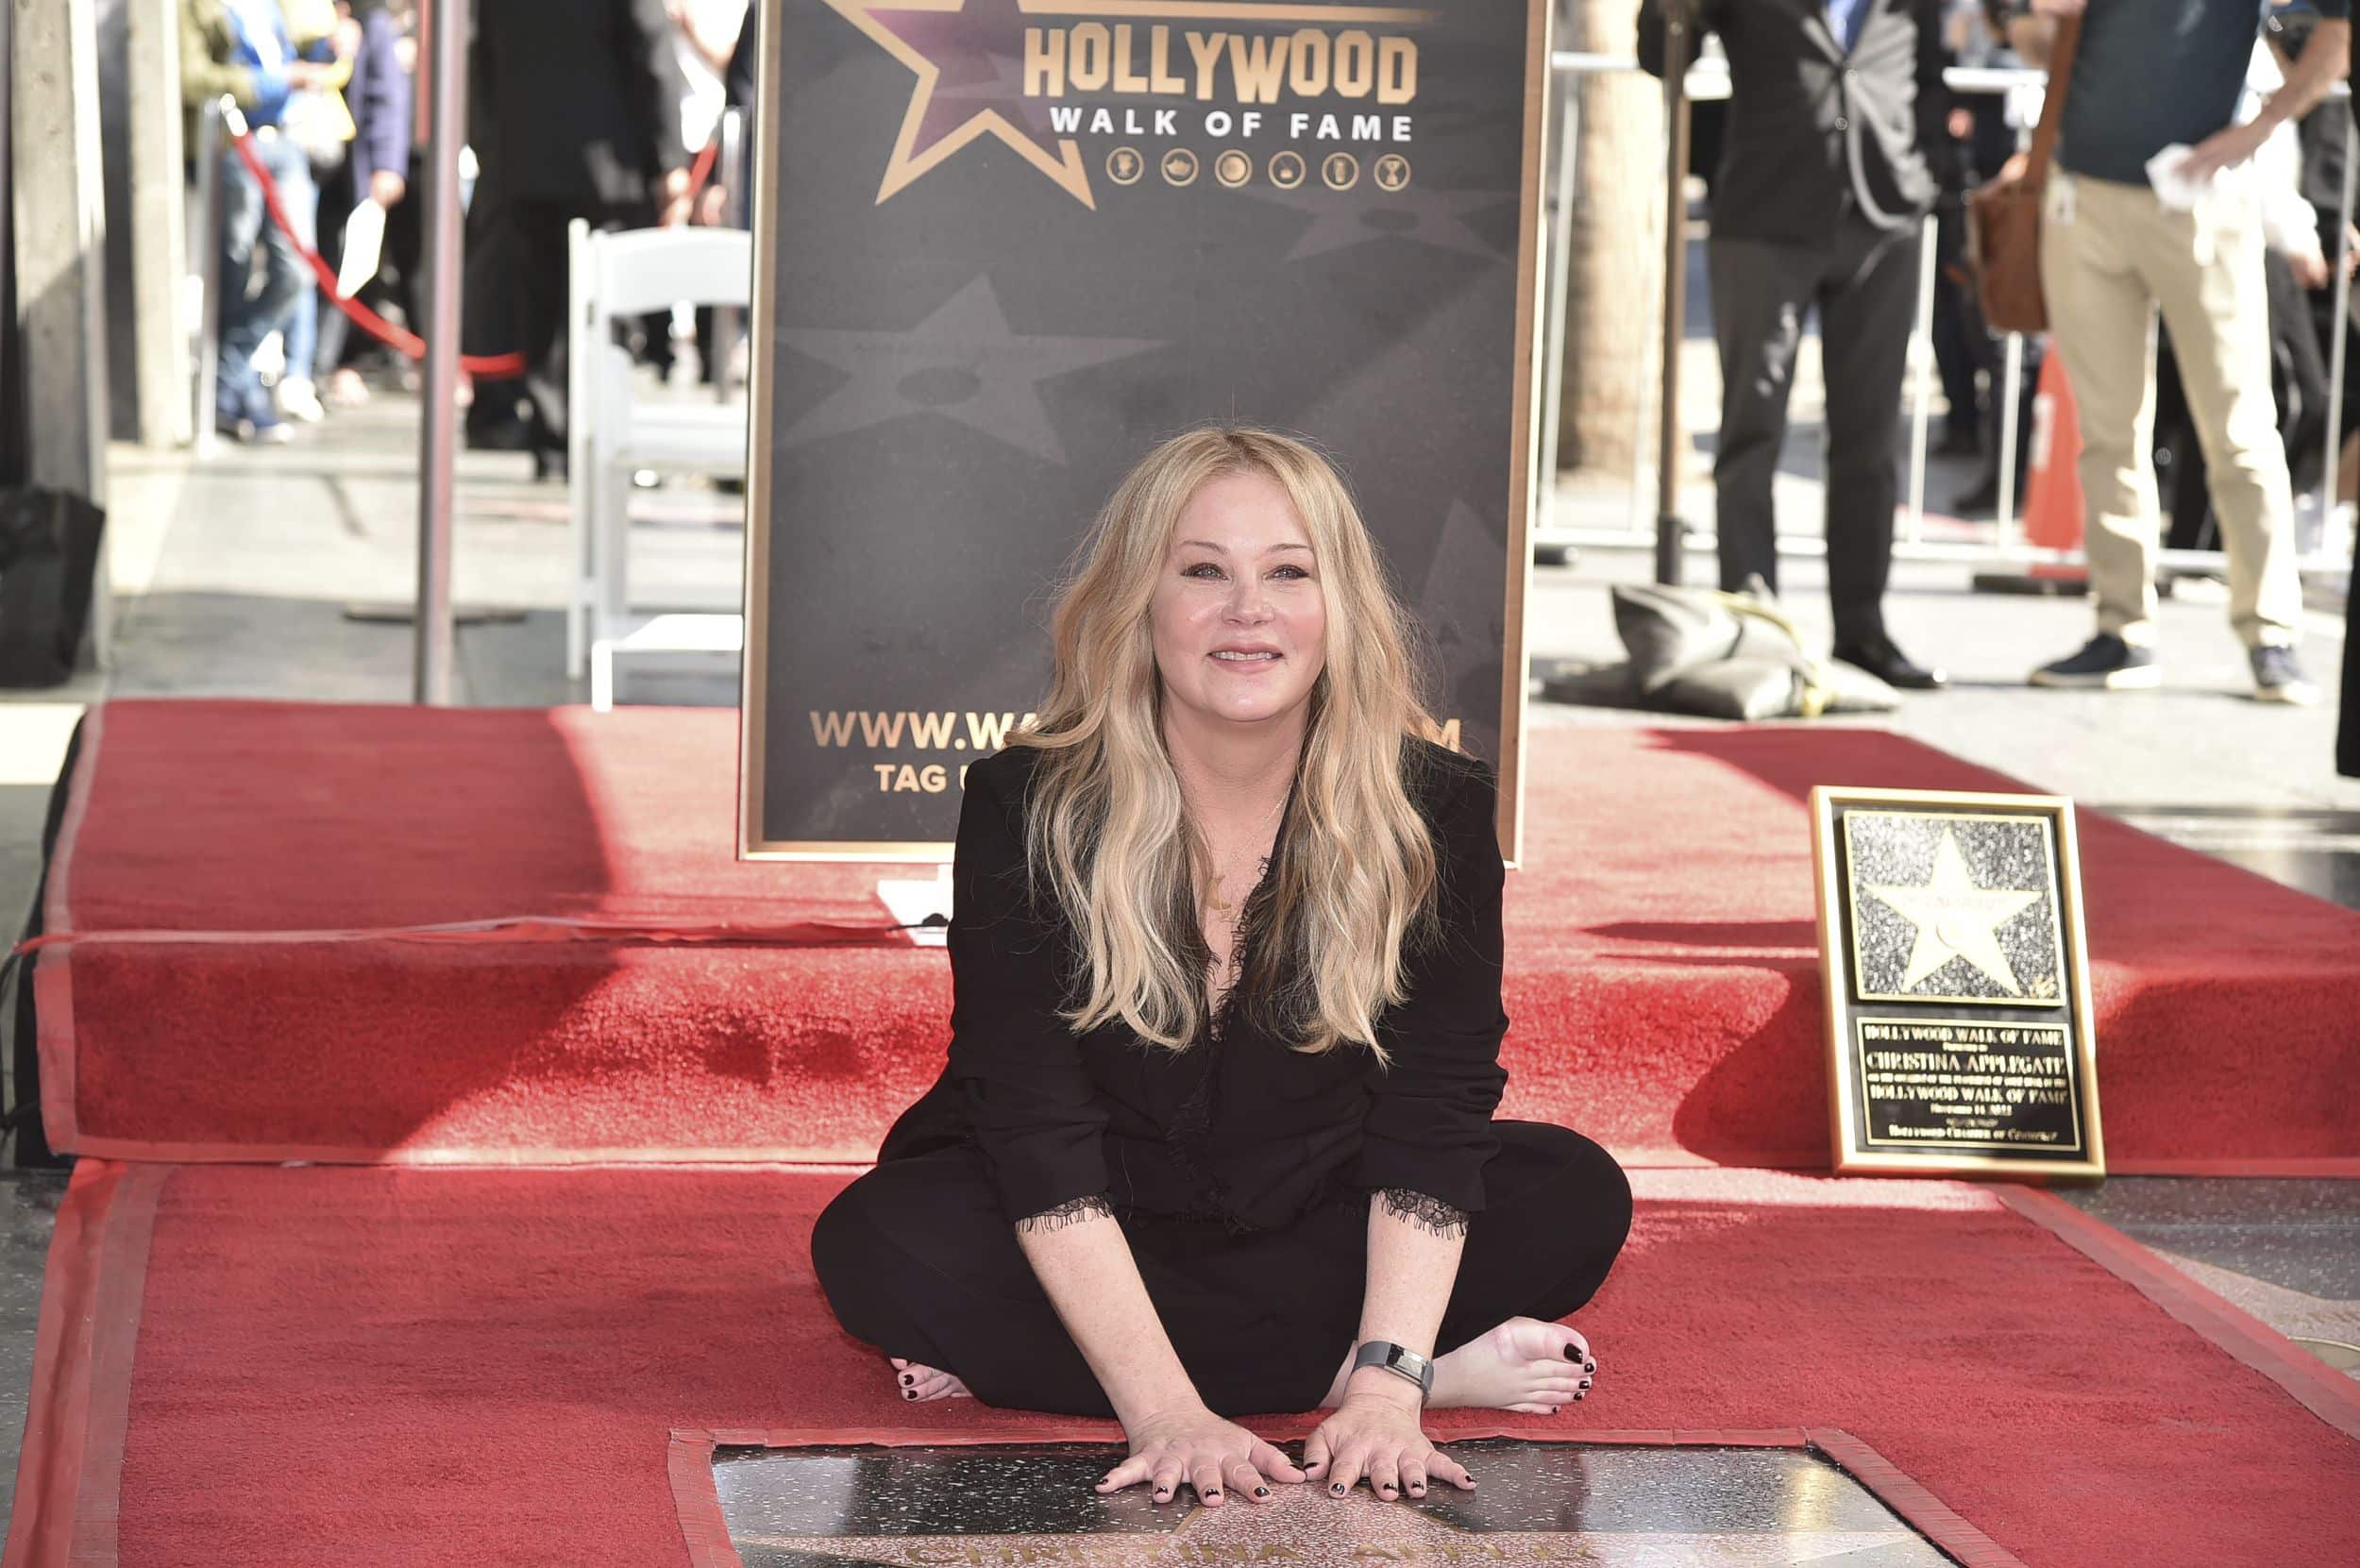 Christina Applegate says Hollywood star means more than you can imagine